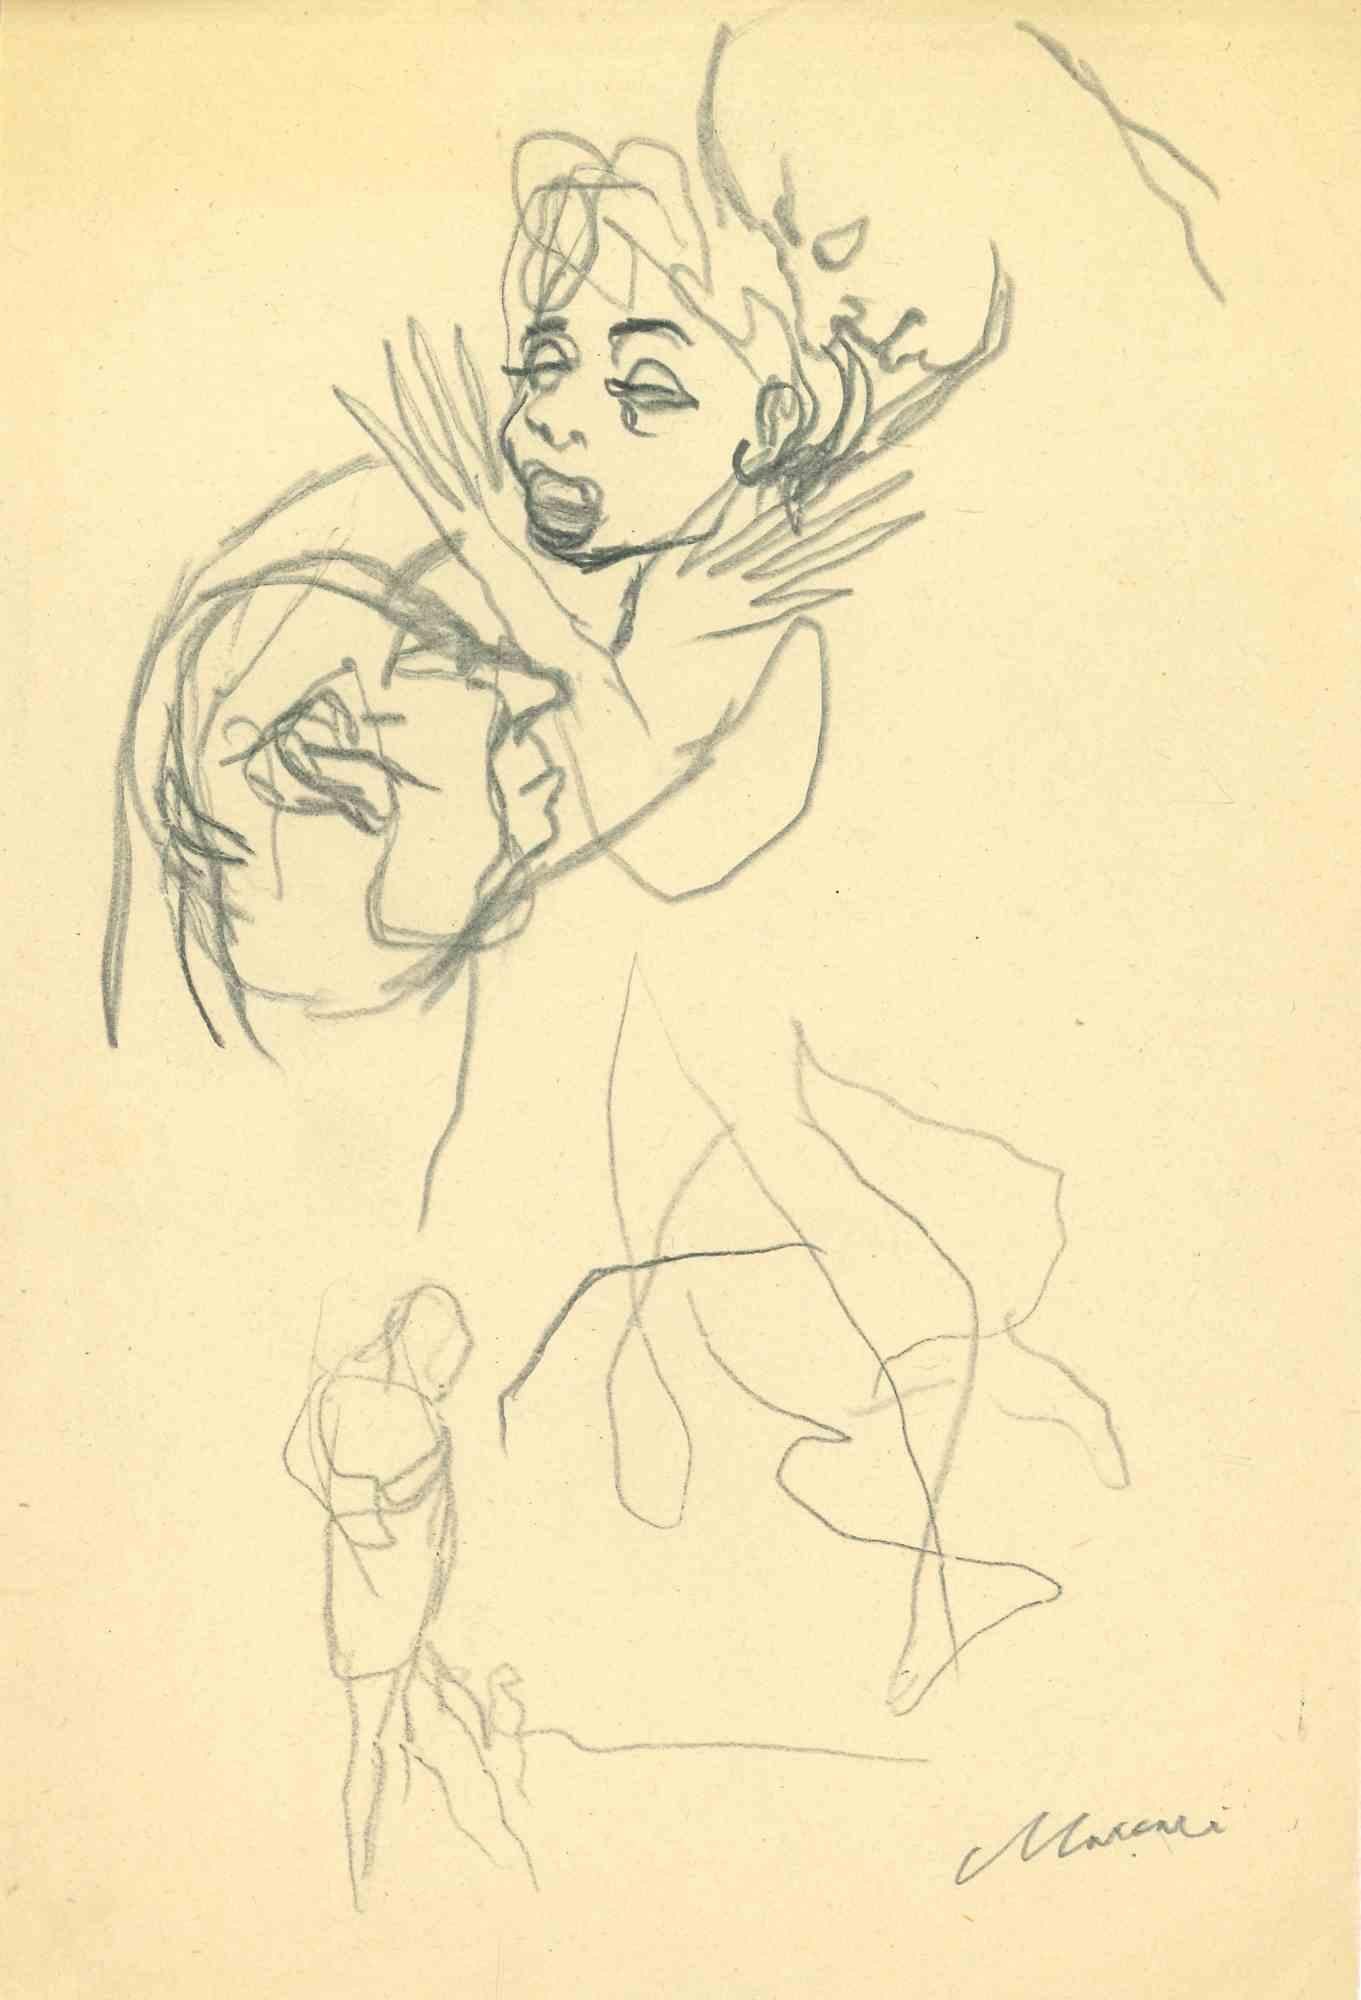 Flattery is a pencil Drawing realized by Mino Maccari  (1924-1989) in the Mid-20th Century.

Hand-signed on the lower.

Good conditions.

Mino Maccari (Siena, 1924-Rome, June 16, 1989) was an Italian writer, painter, engraver and journalist, winner